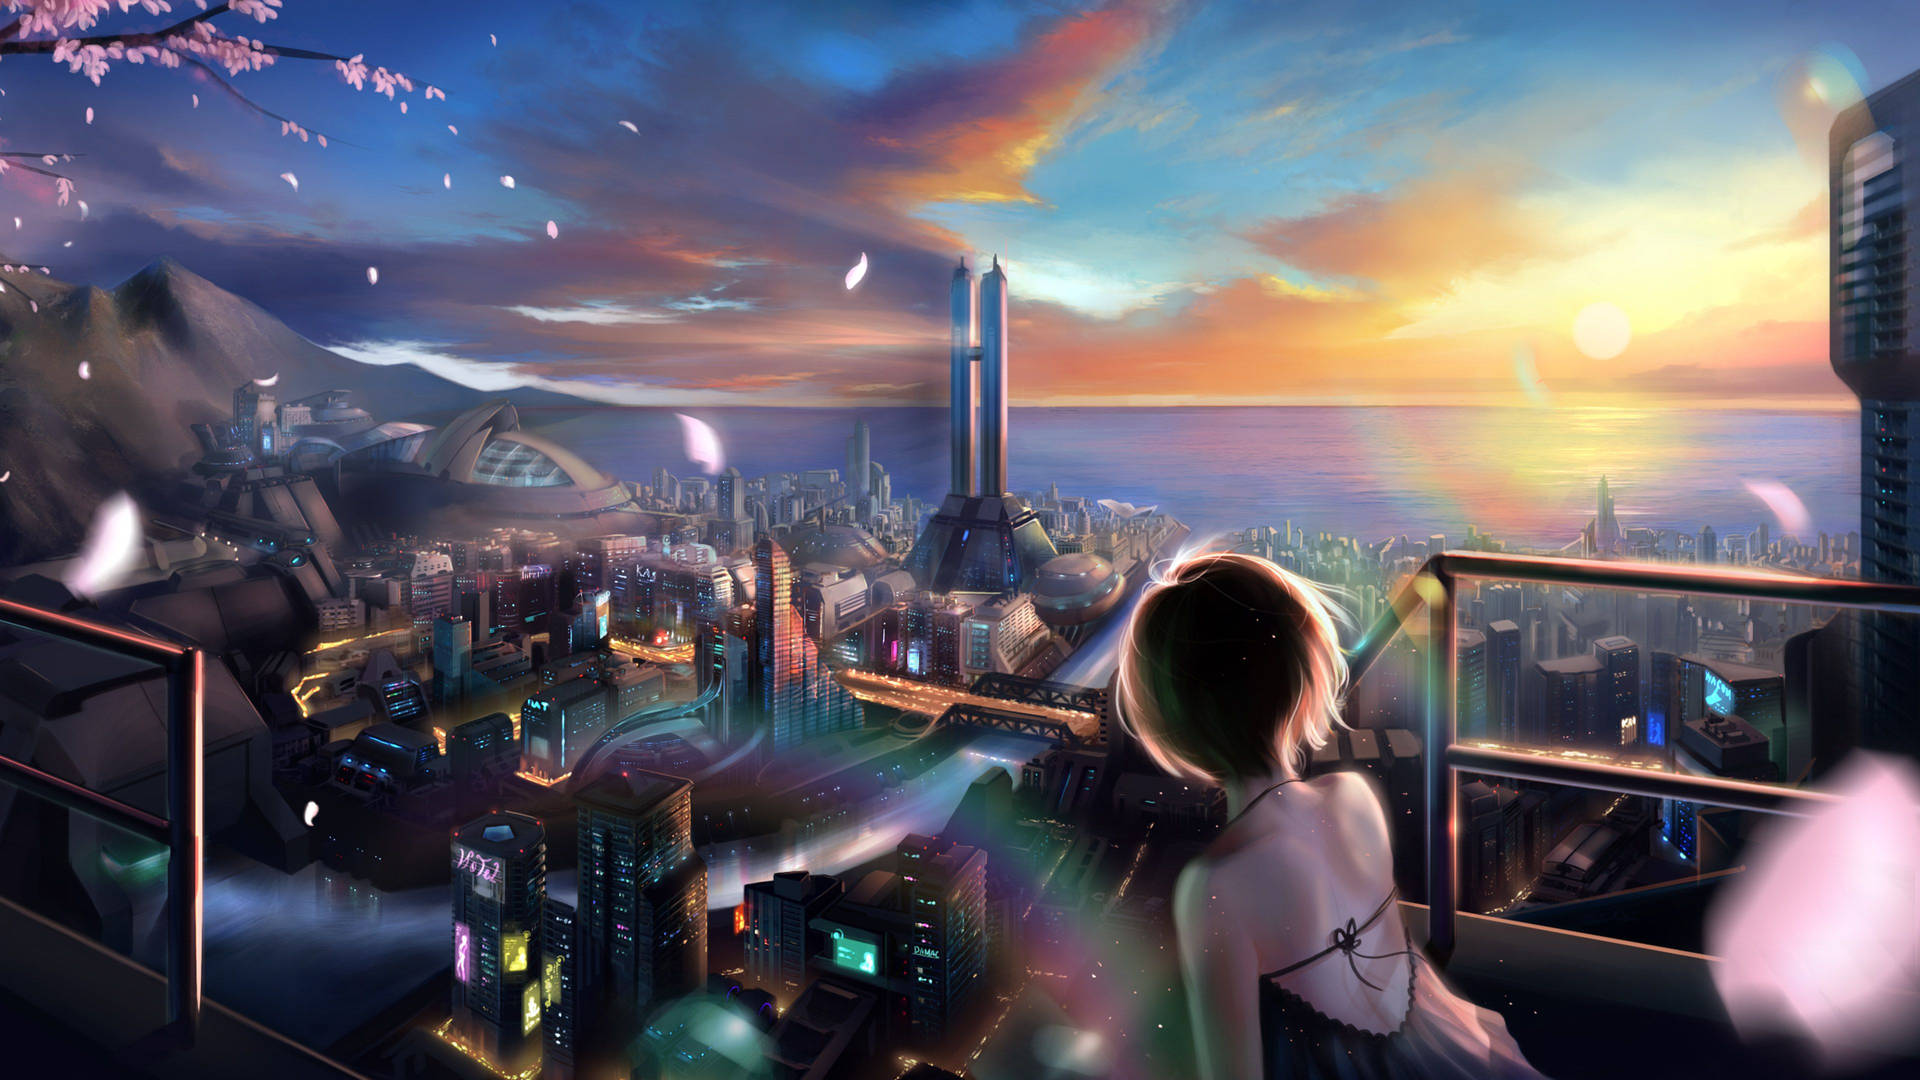 A Girl Looking Out Over A City At Sunset Wallpaper